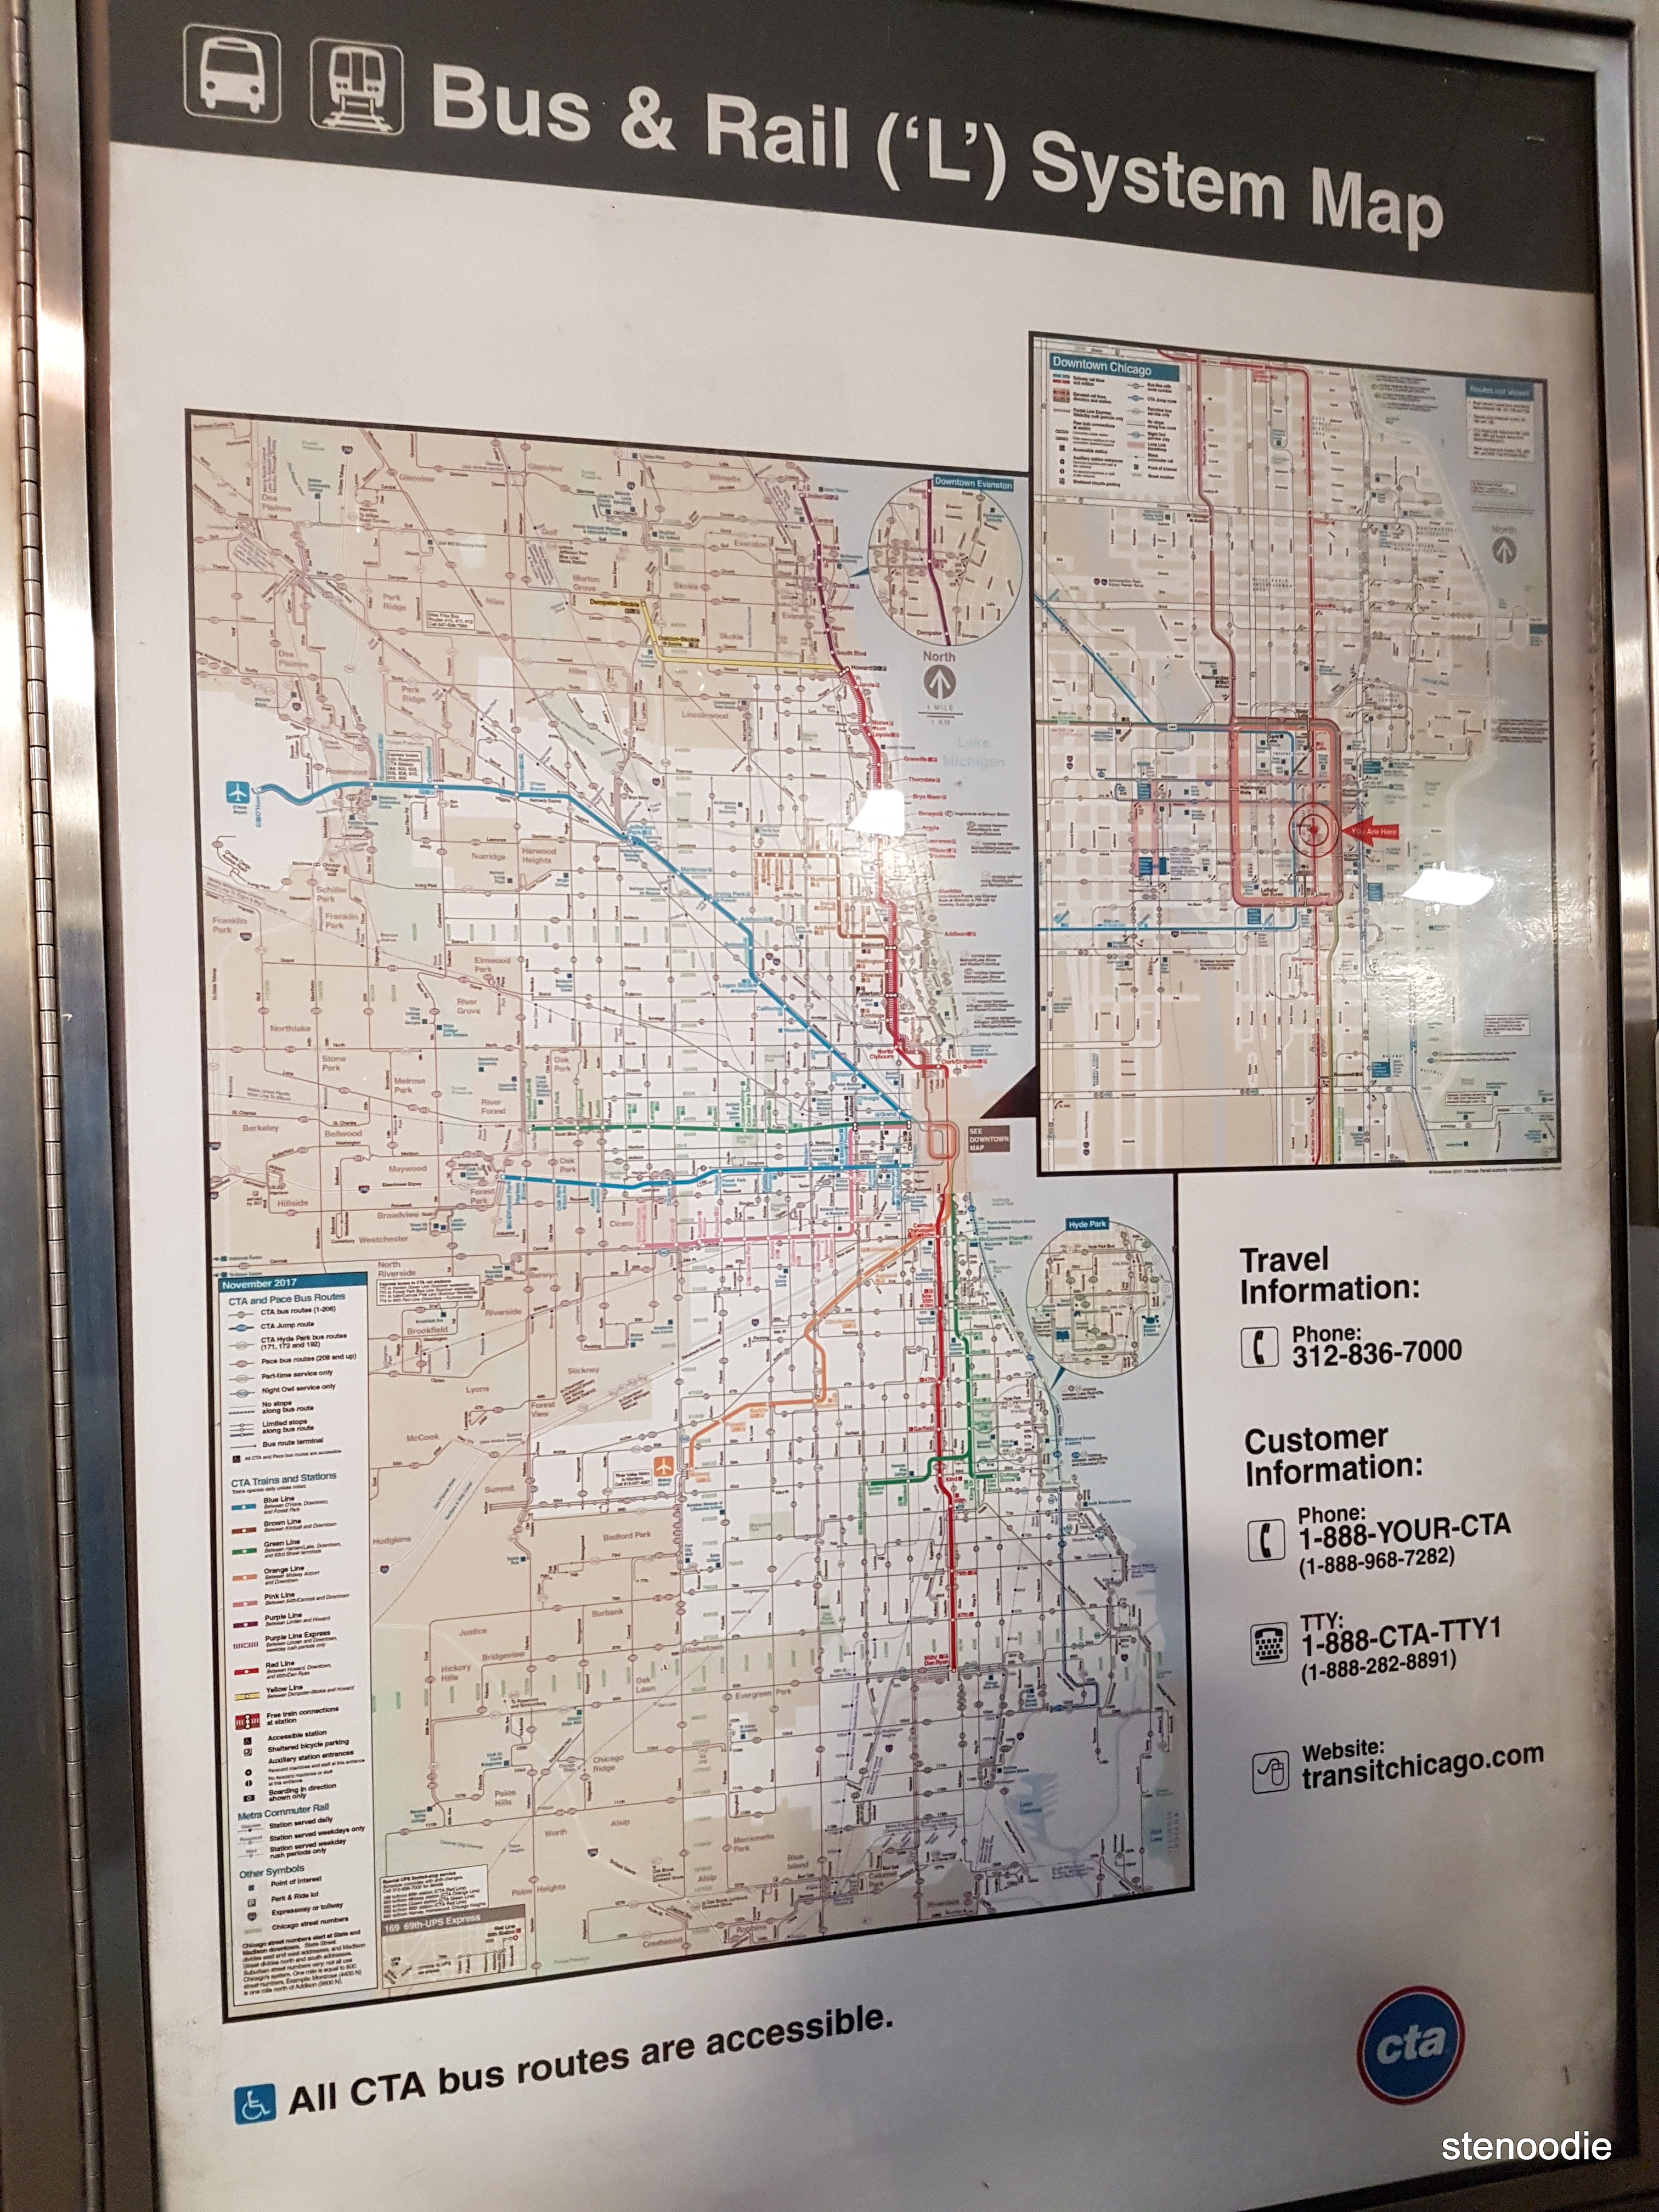  Chicago bus and rail map